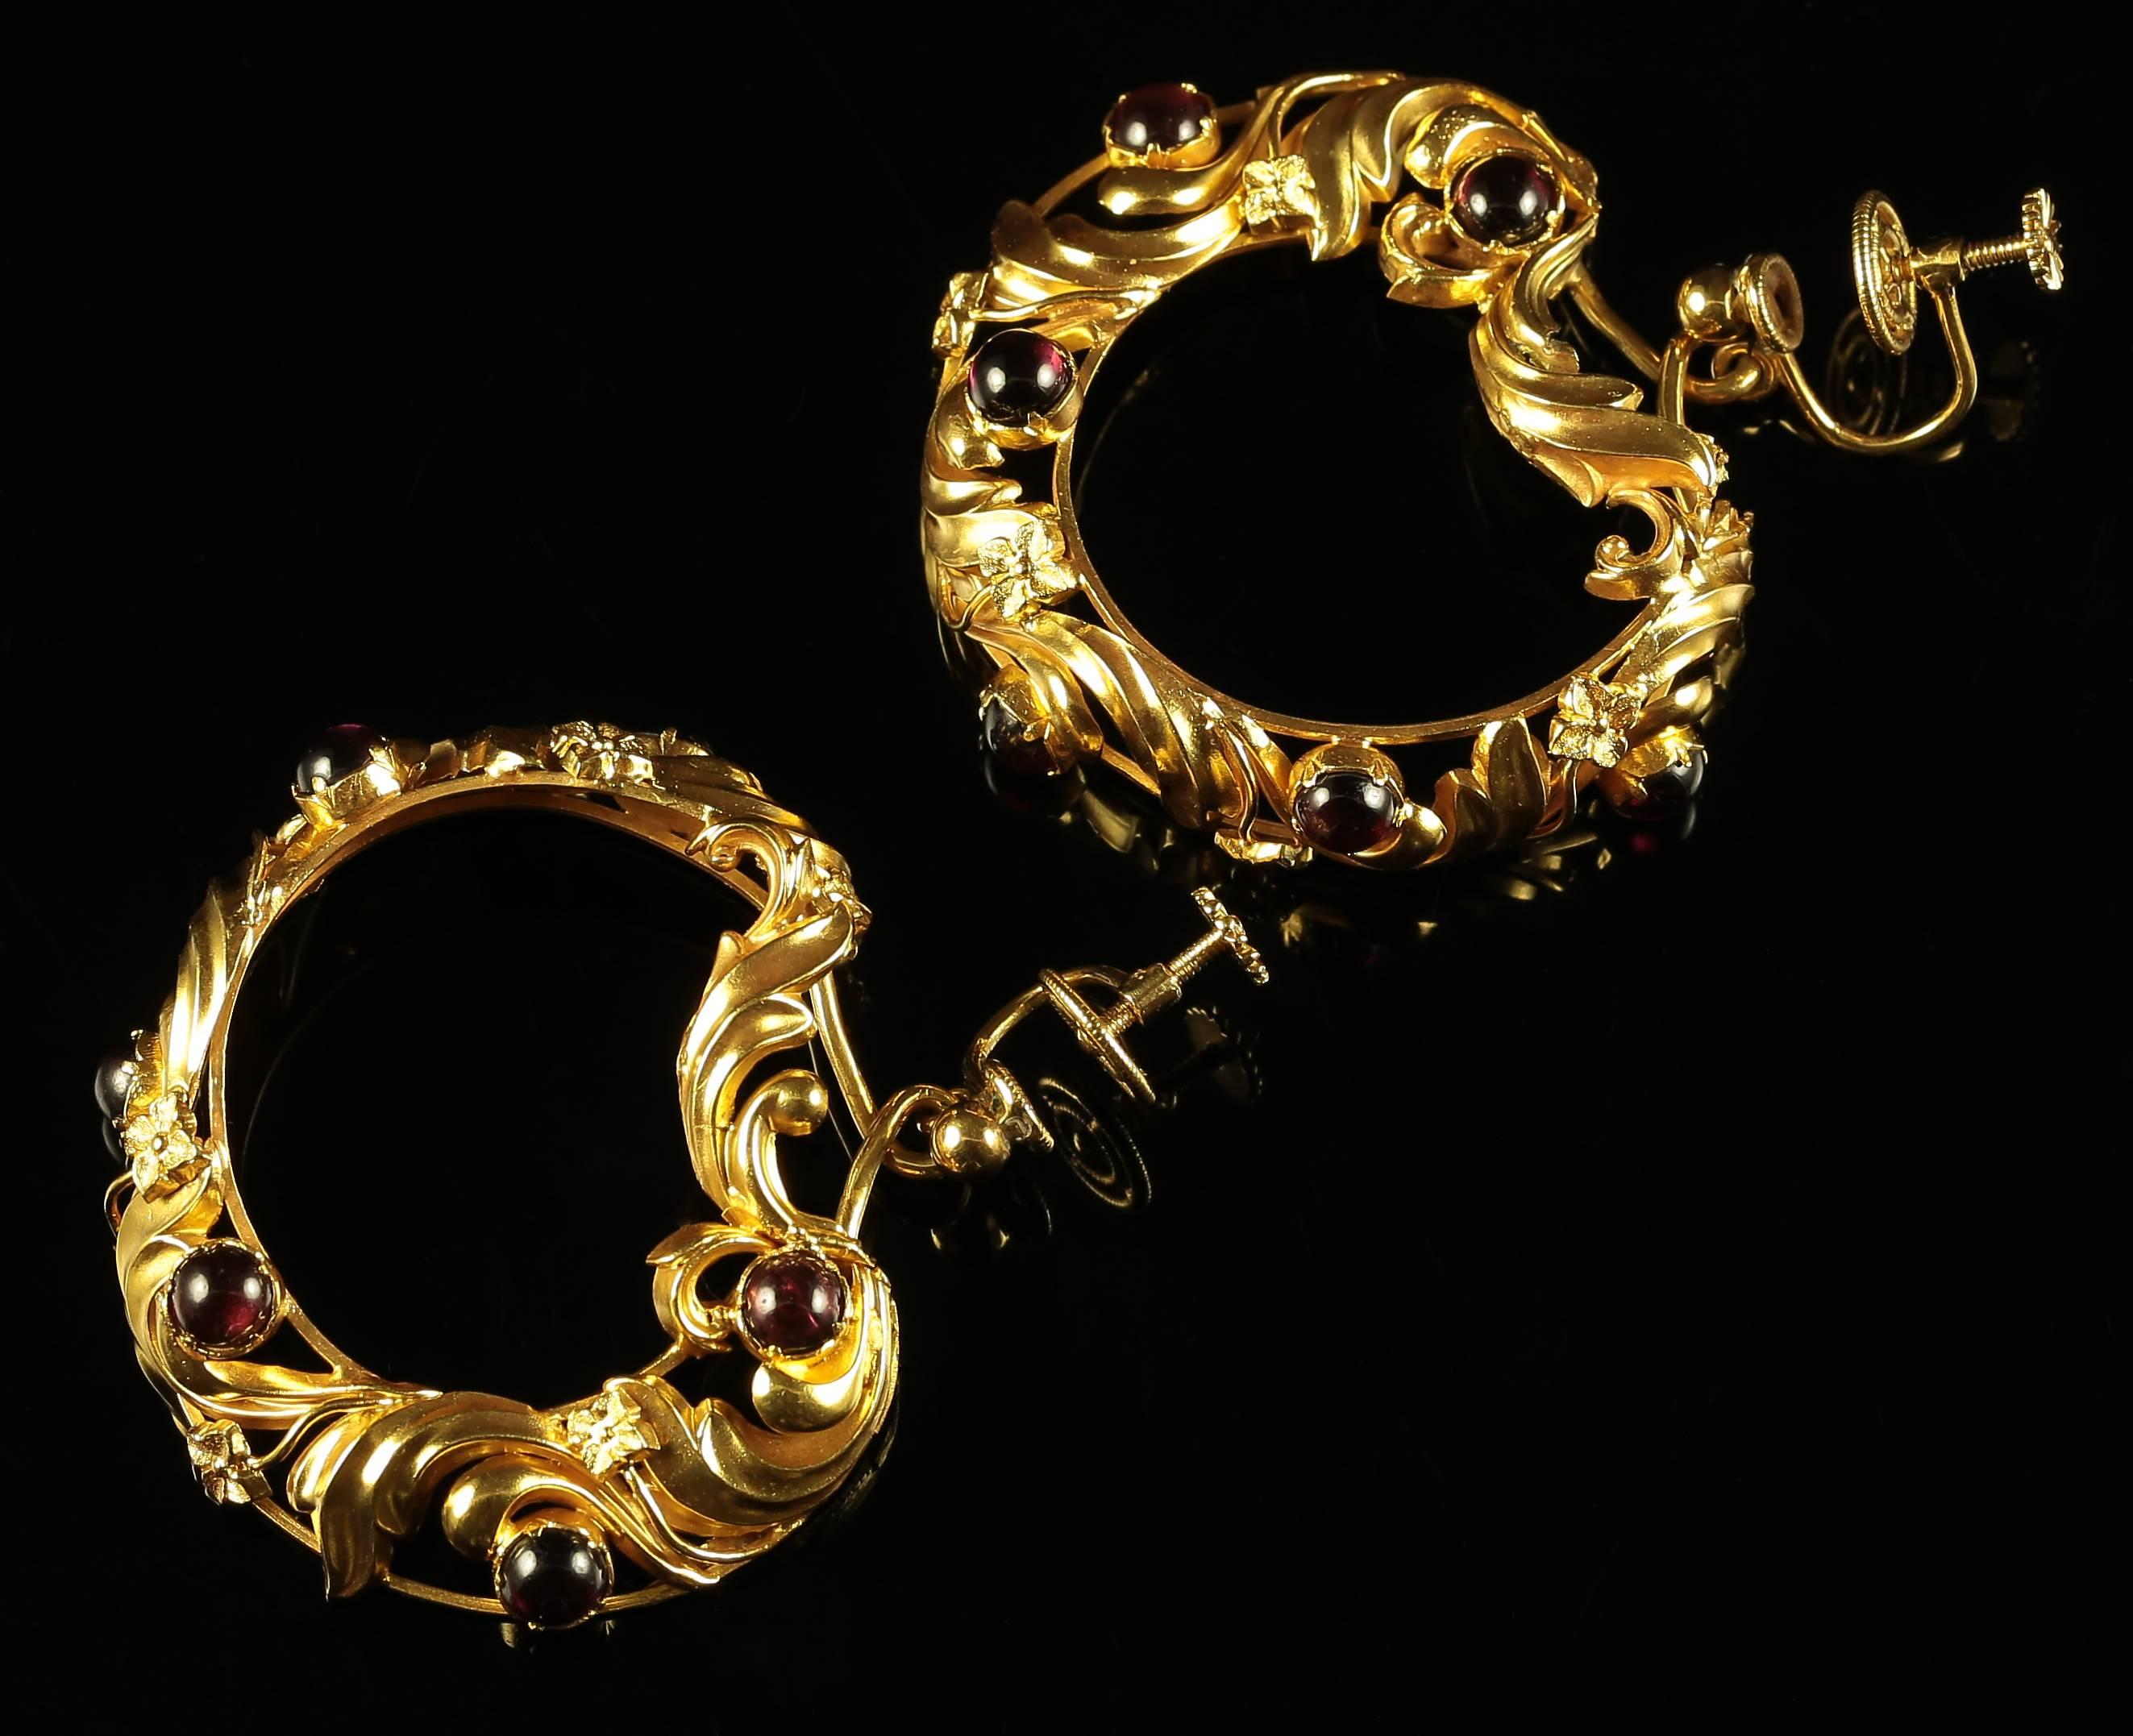 These 18ct yellow gold earrings are fabulous, large and exquisitely made with a matching brooch. 

Set in 18ct yellow gold displaying beautiful all round intertwined workmanship and lovely garnets 

The Garnet is a stone of purity and truth as well